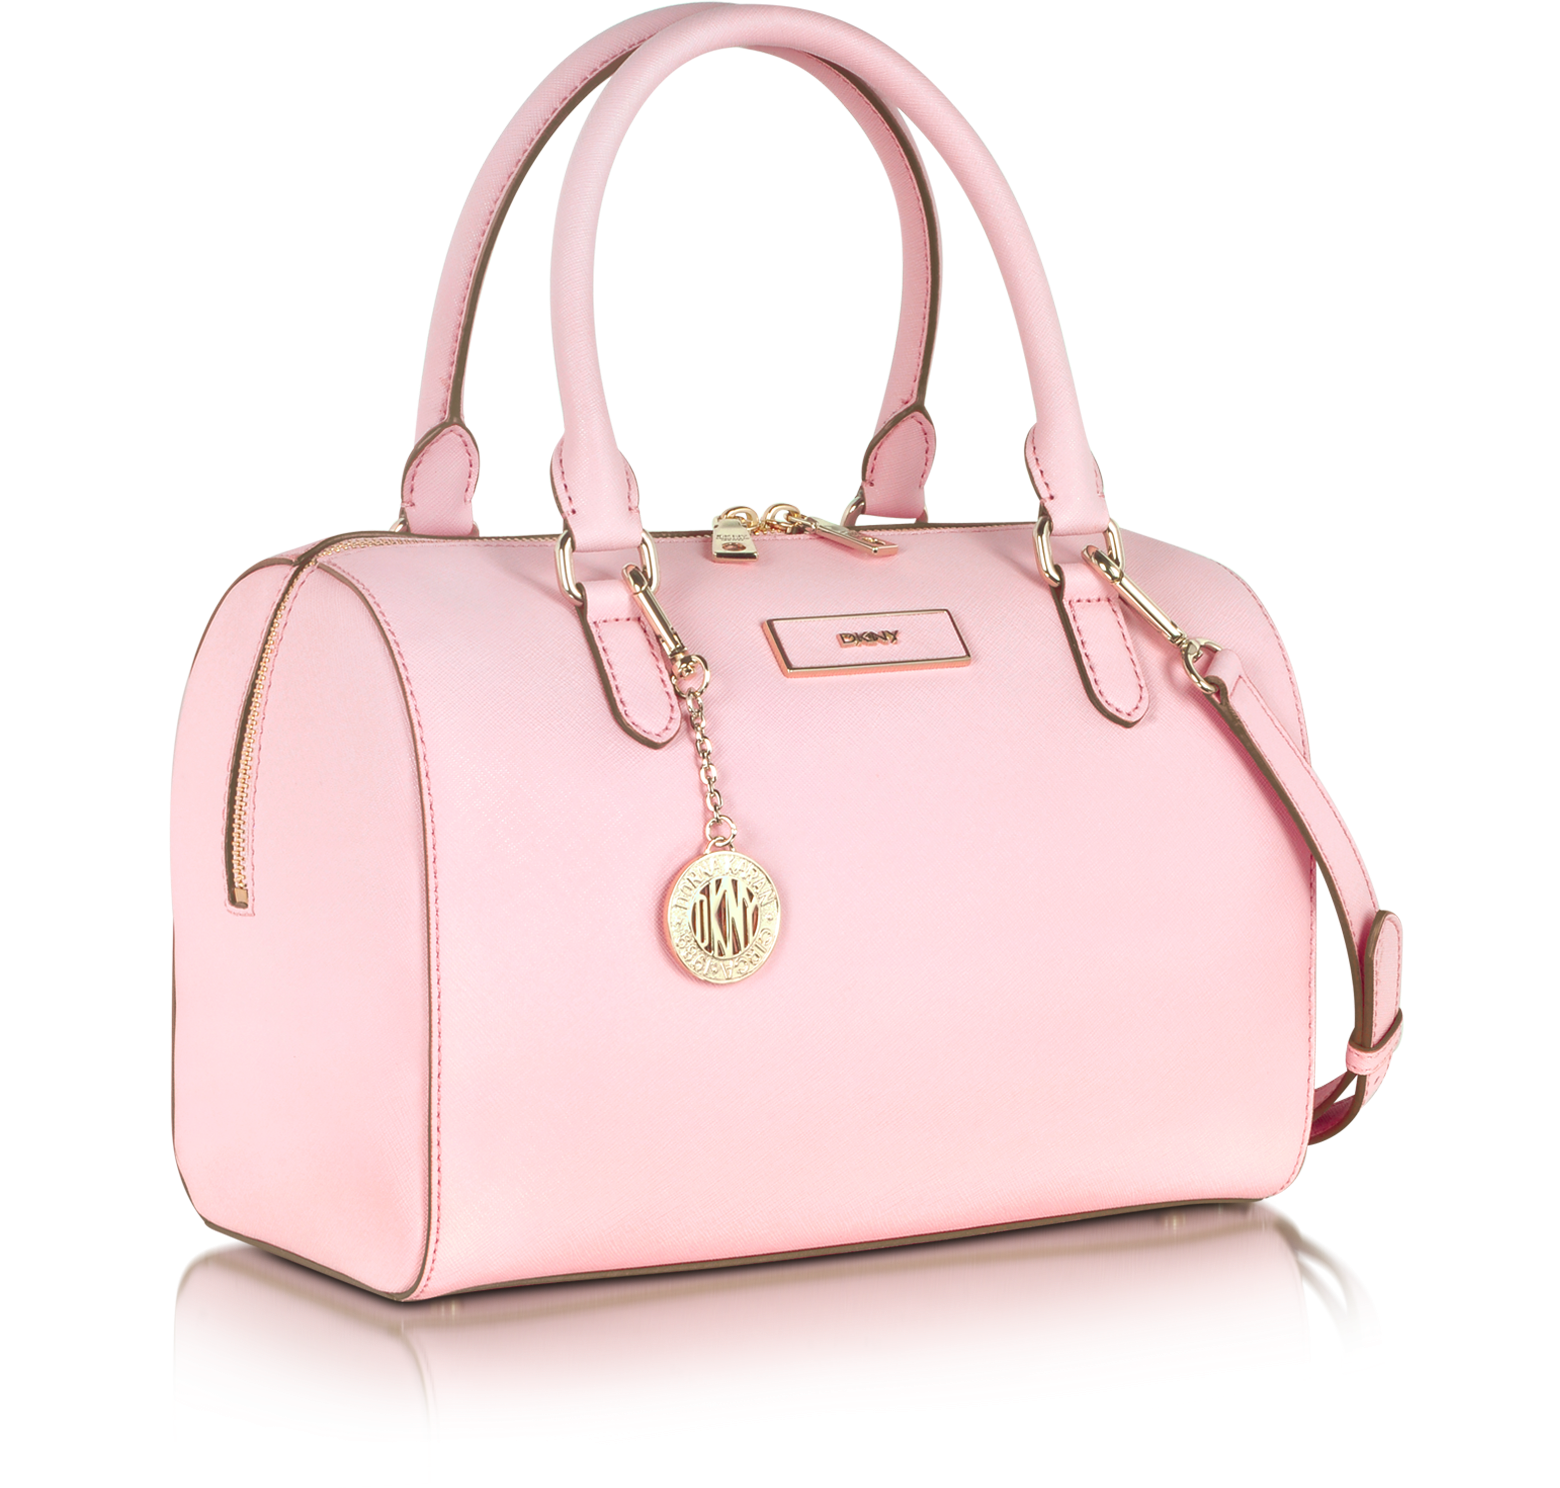 DKNY Pink Bryant Park Saffiano Leather Satchel Bag at FORZIERI